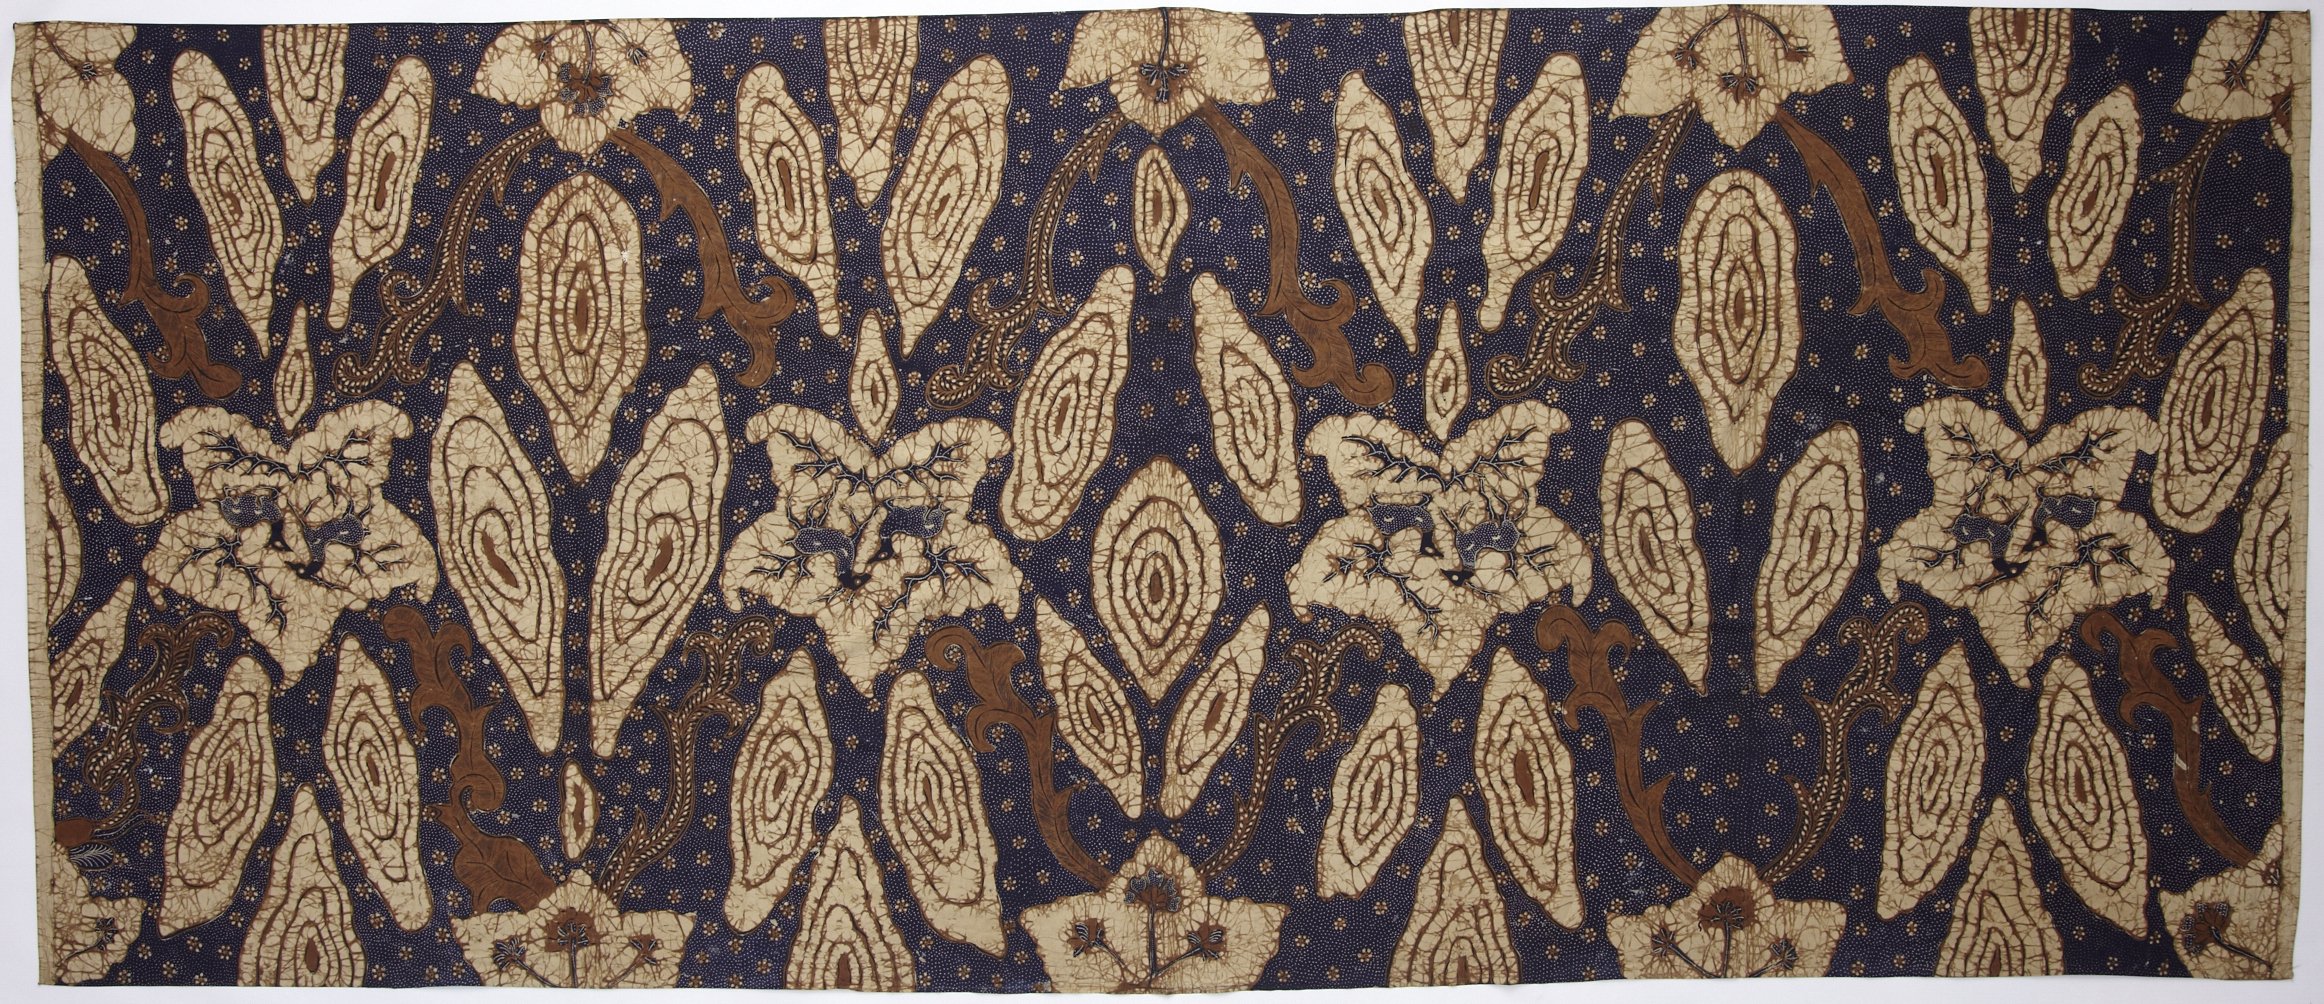 What Is Batik? A Look at the Indonesian Textile